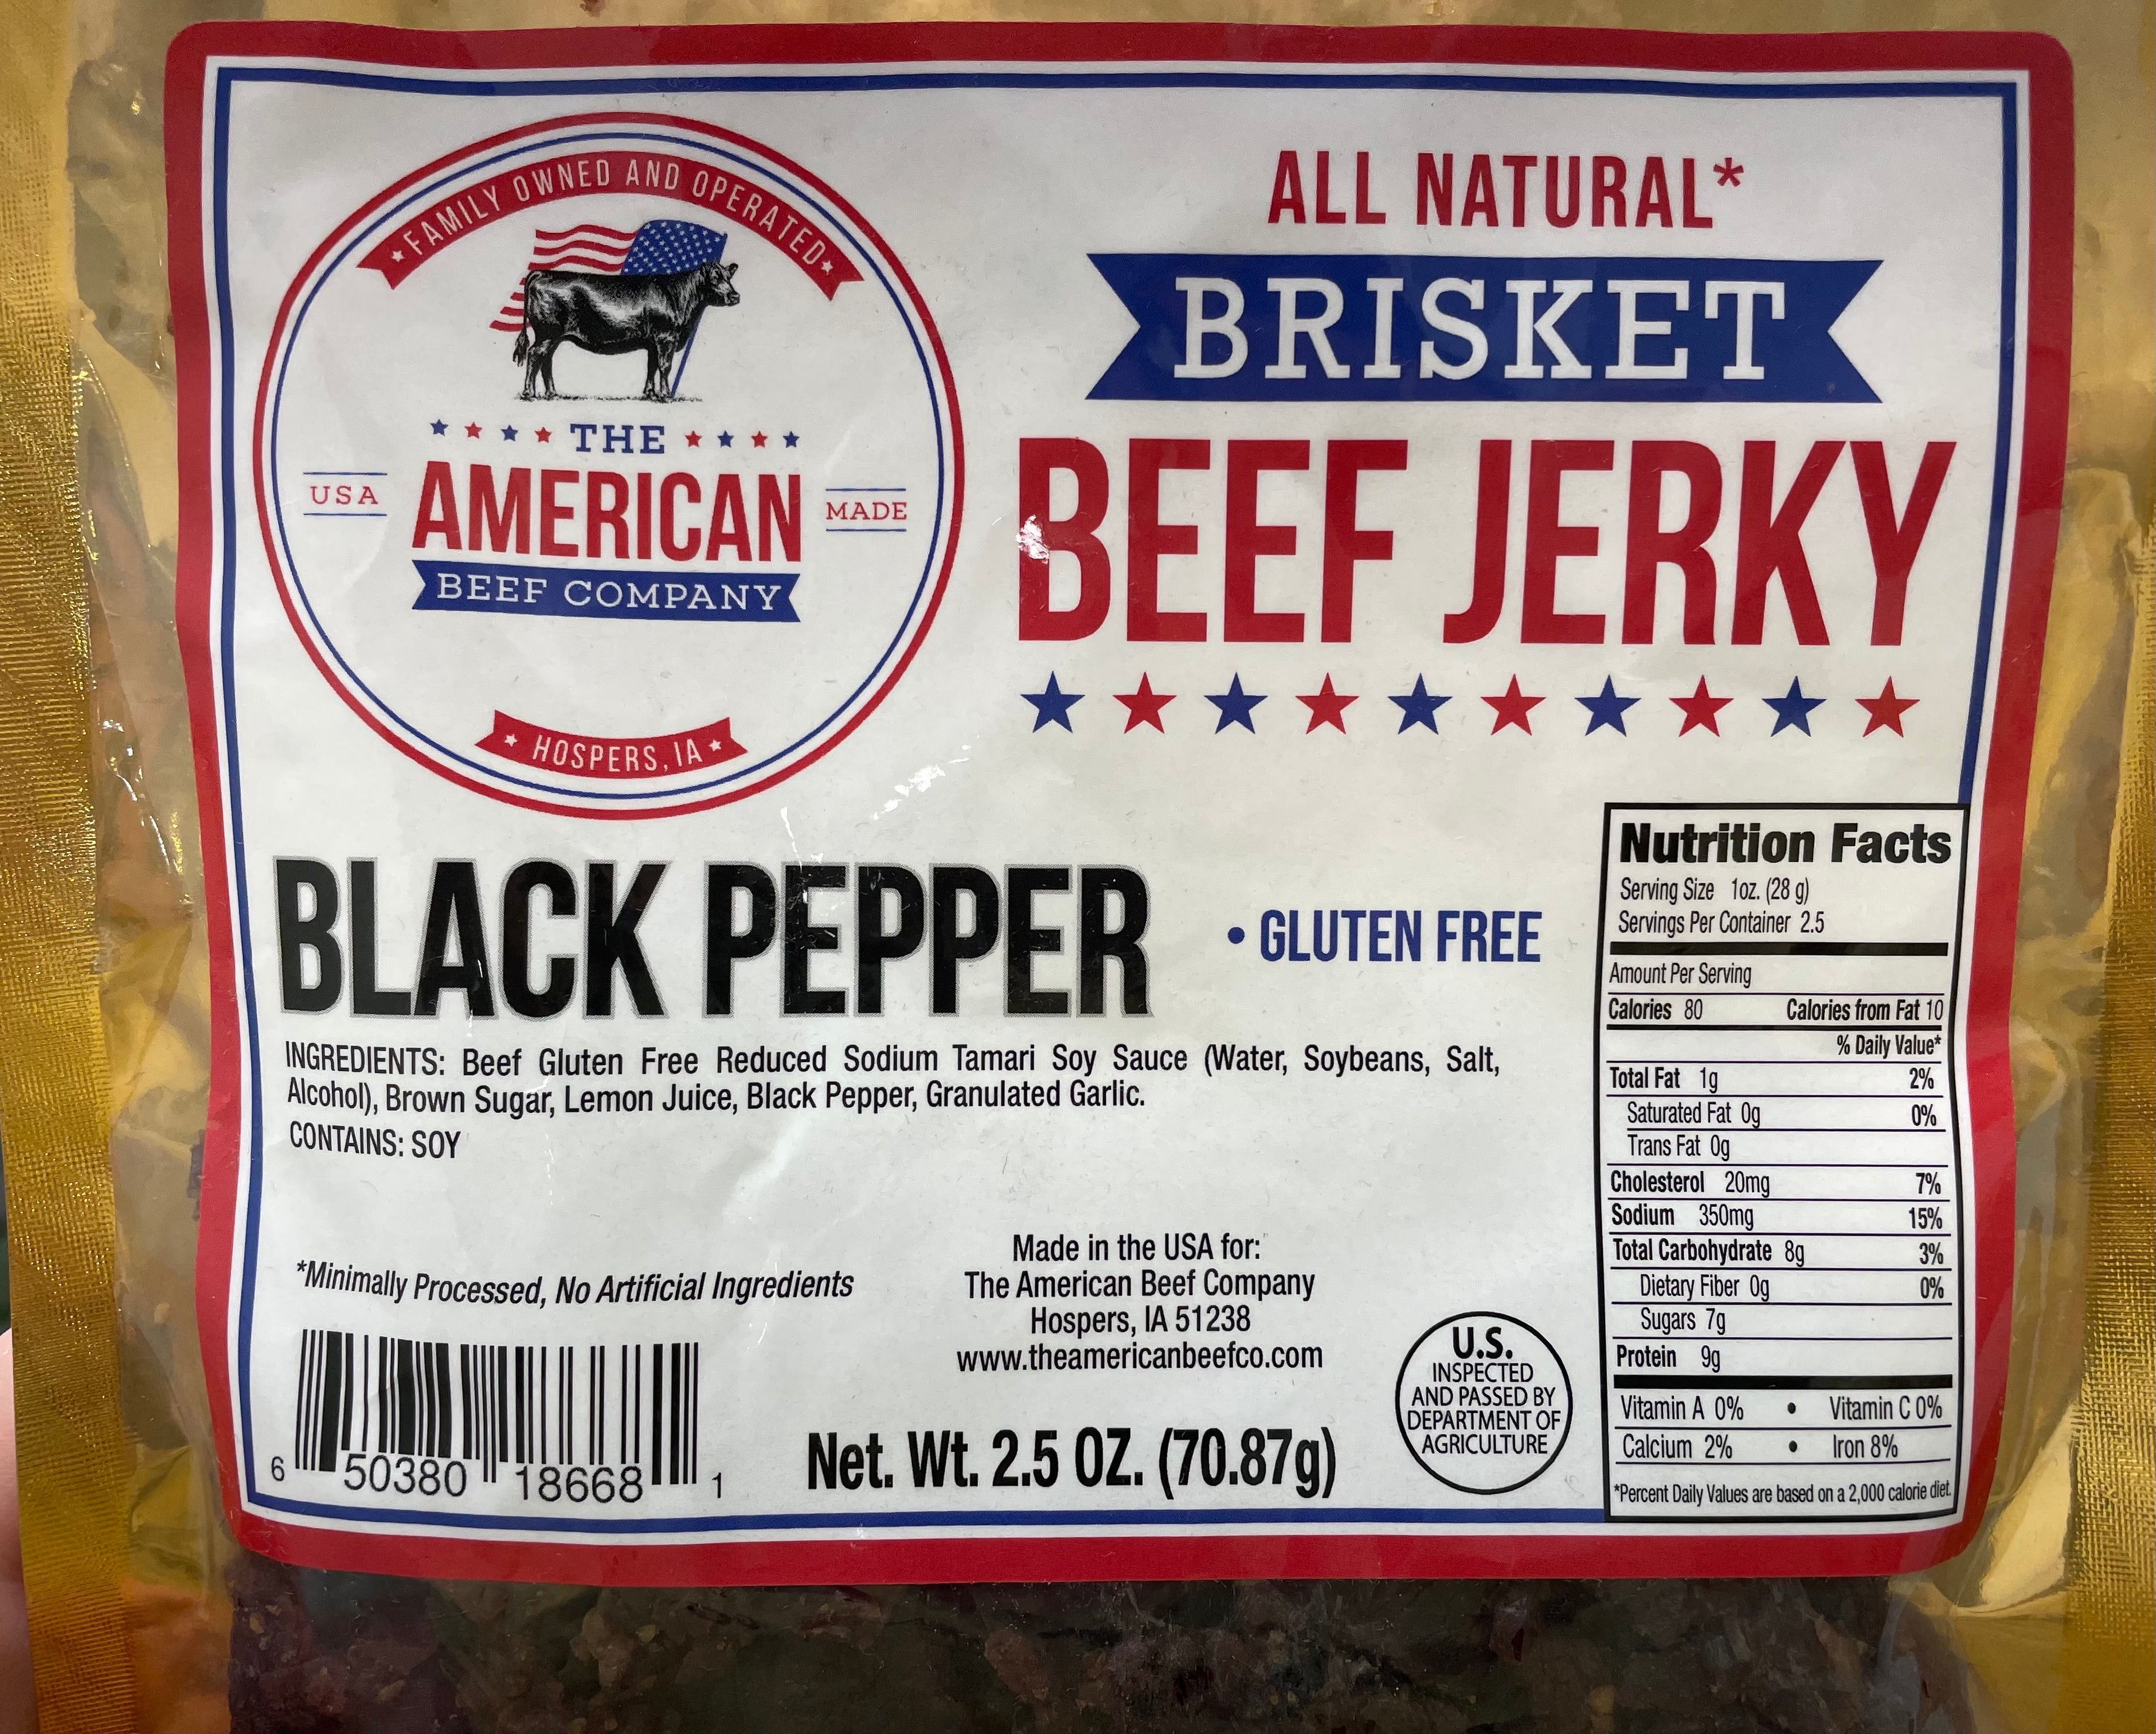 Close up shot of American Beef Company Brisket Beef Jerky product label of Black pepper